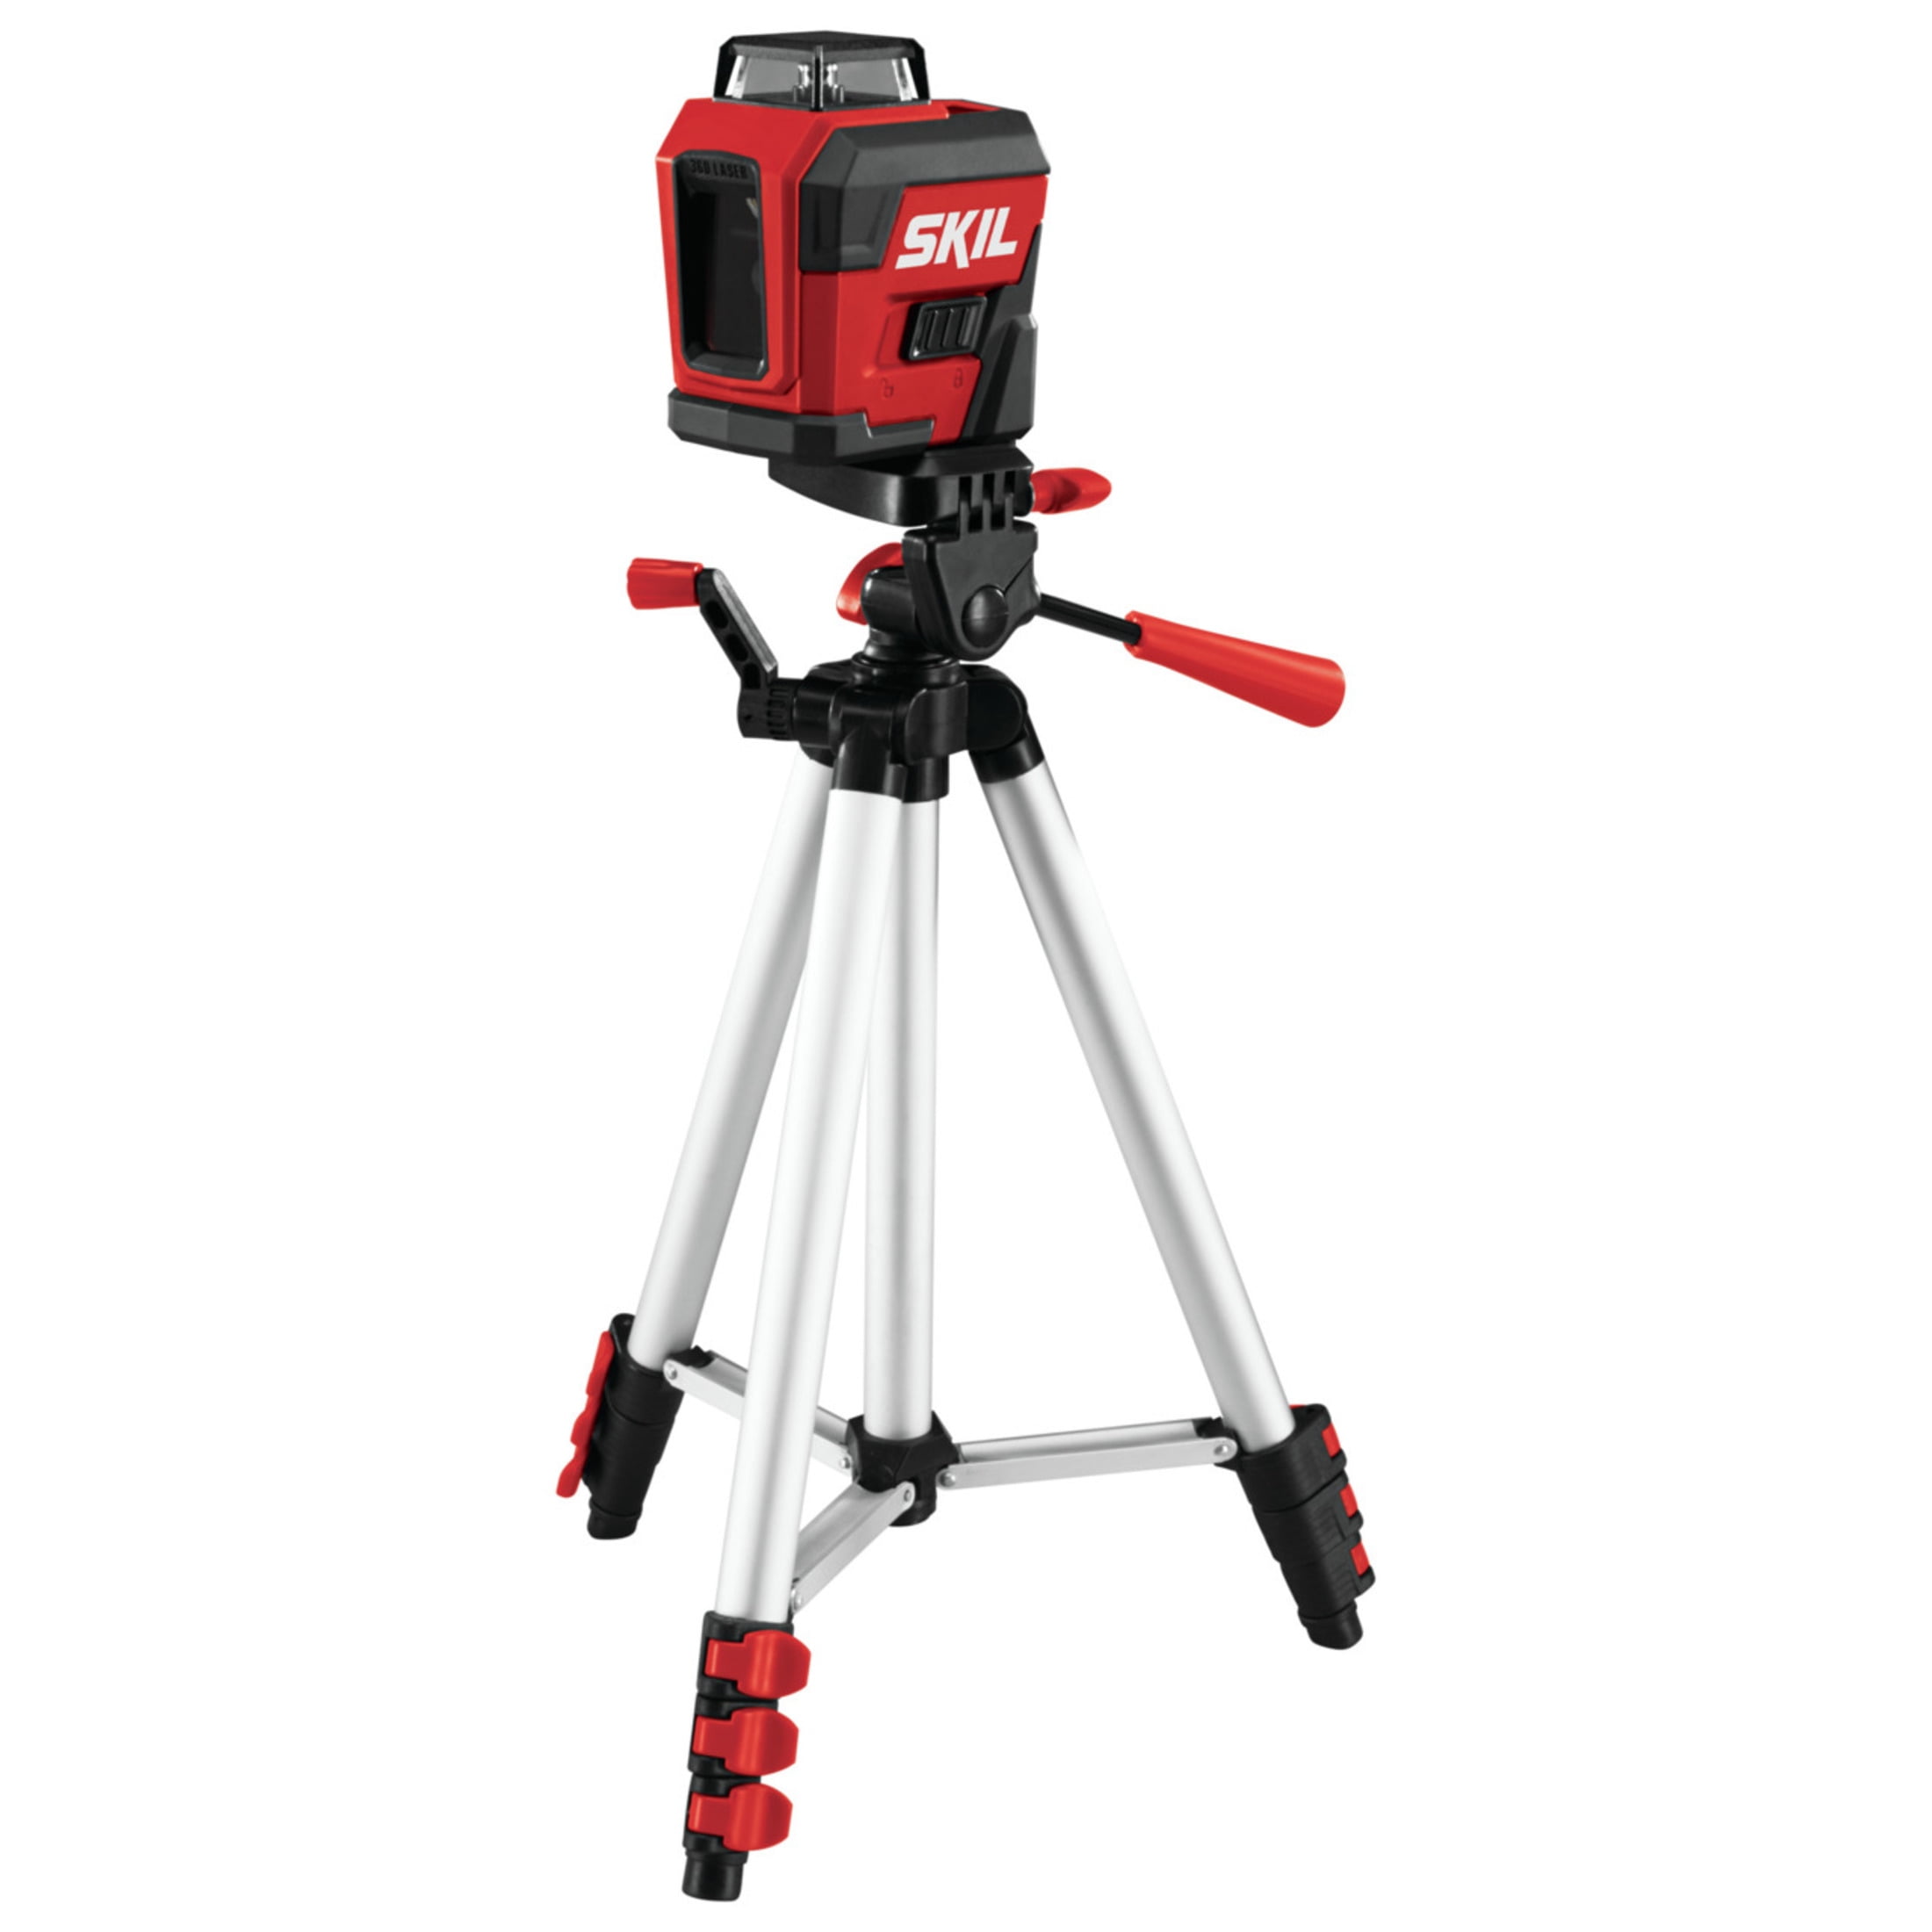 Auto Self Leveling Cross Line Laser Level Bright Red Beam Indoor Outdoor Tripod 